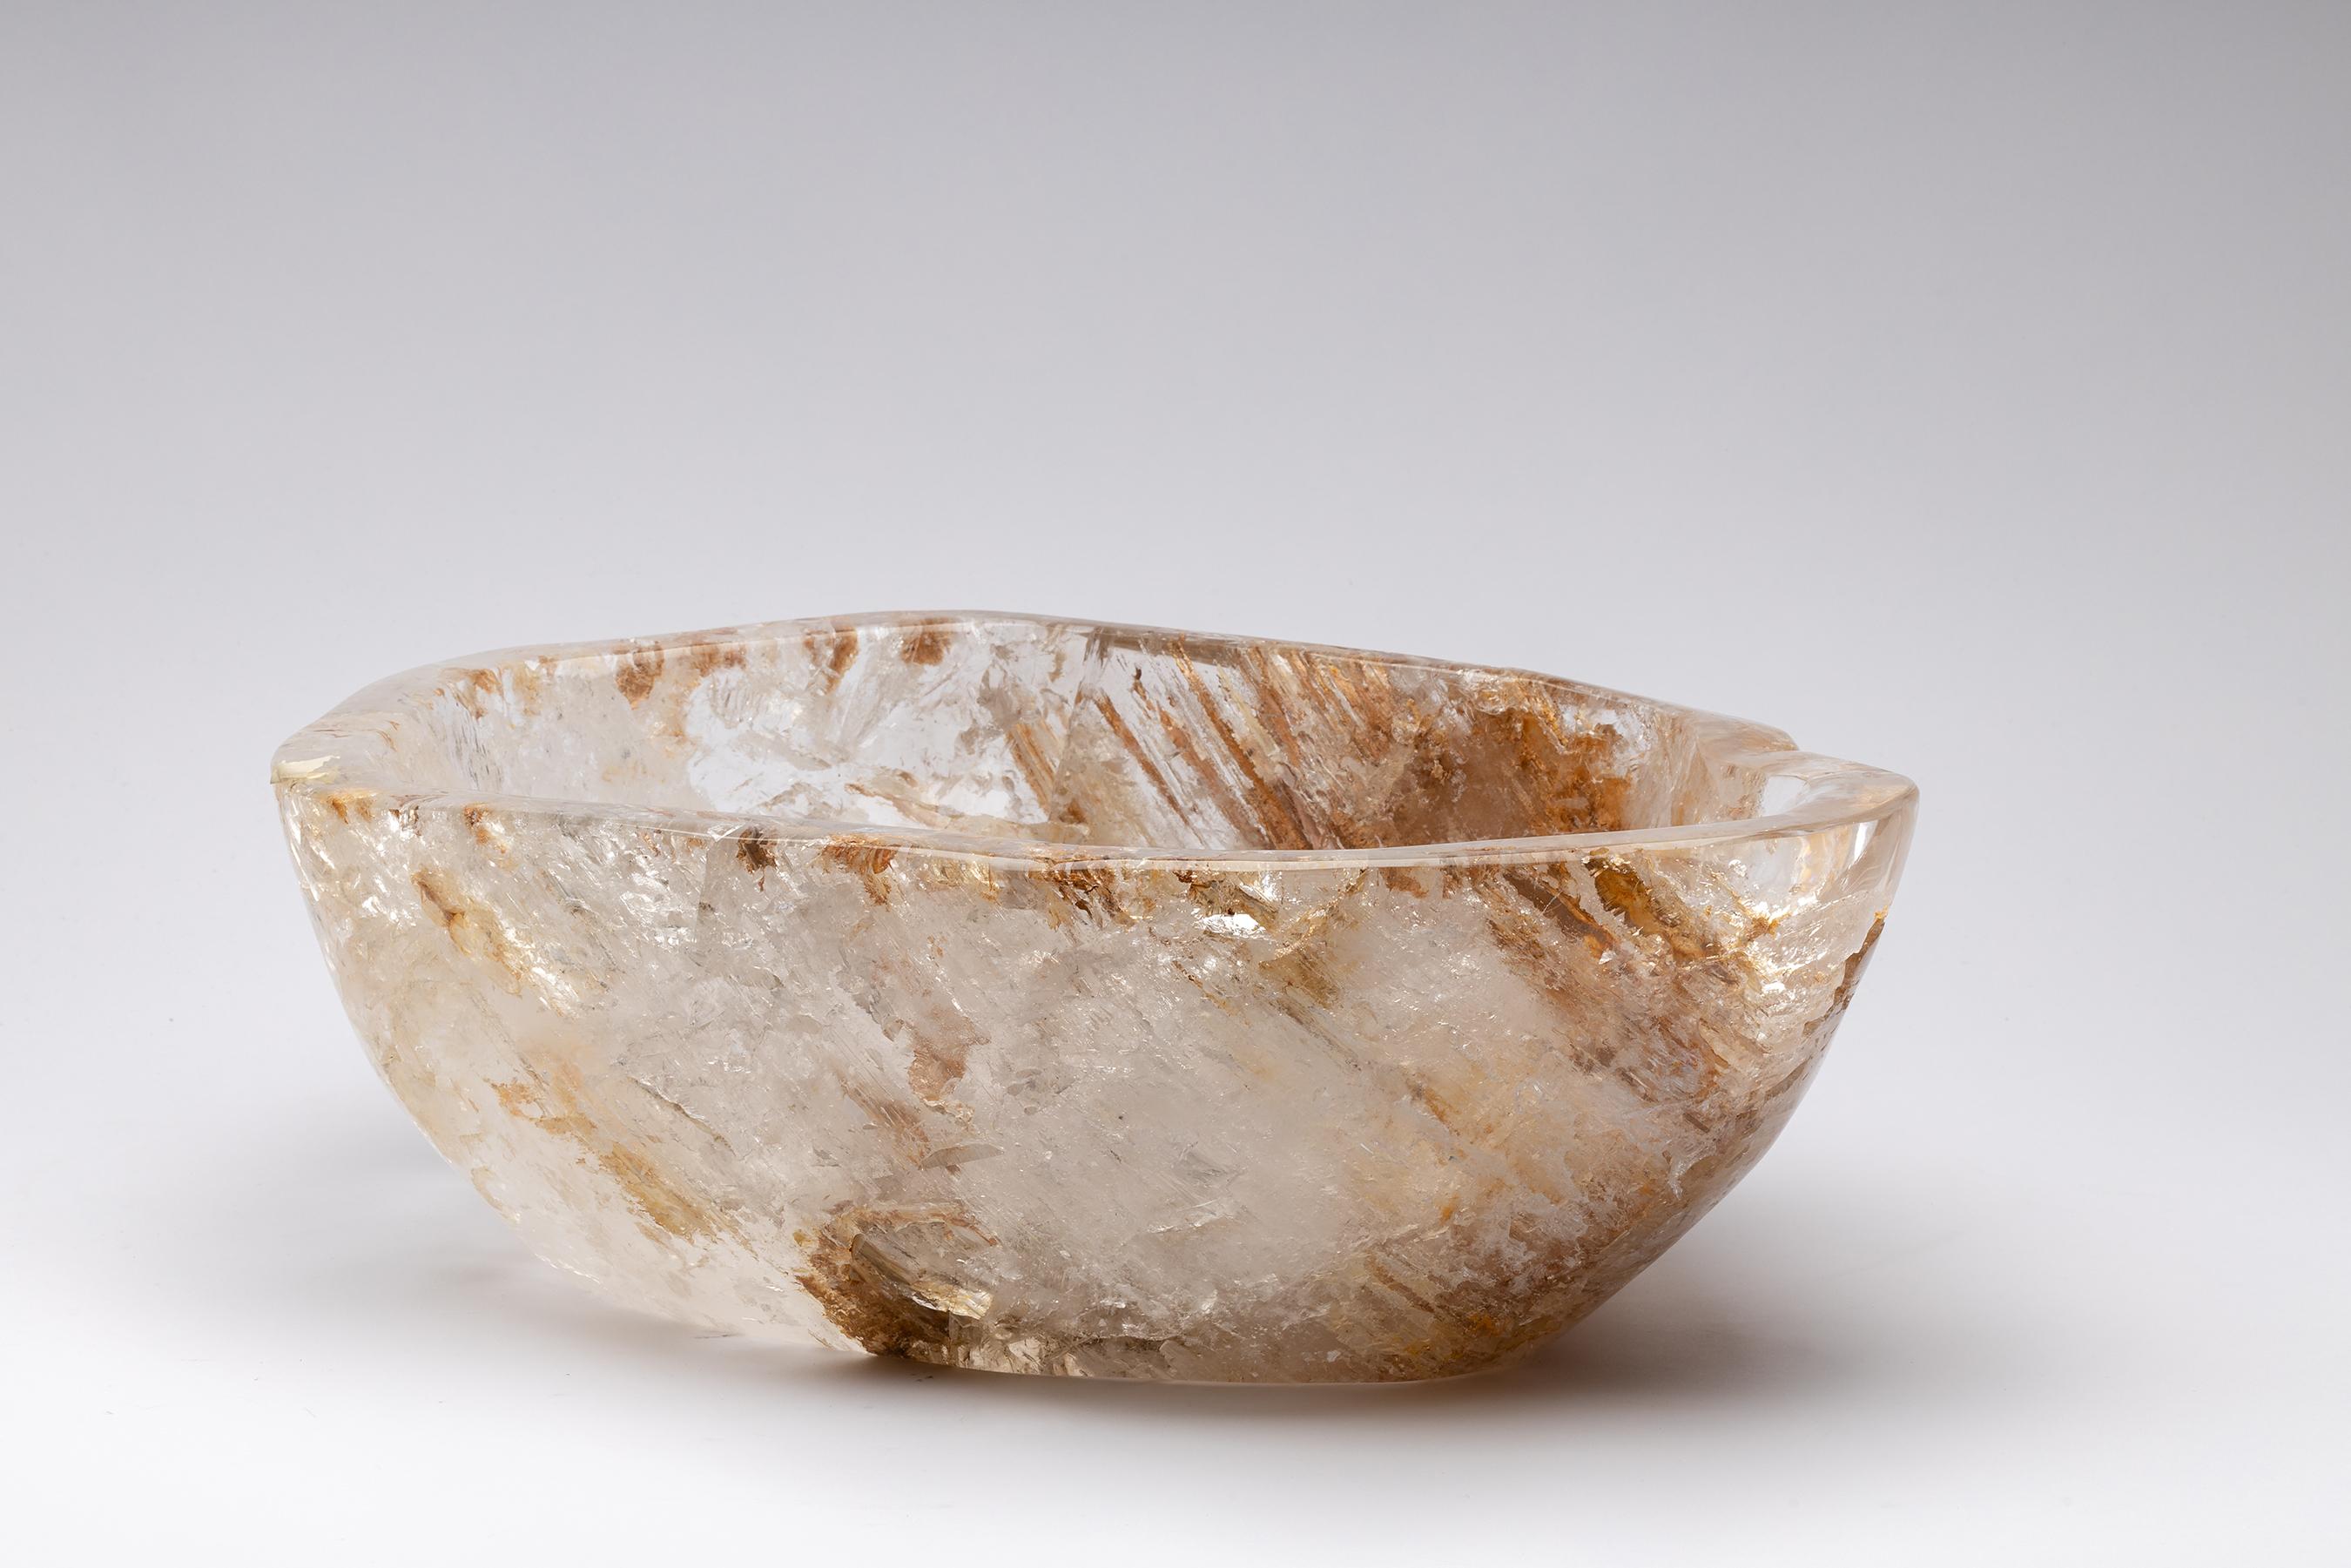 Polished Large White Brazilian Quartz with Oxide Inclusions Bowl in Organic Shape